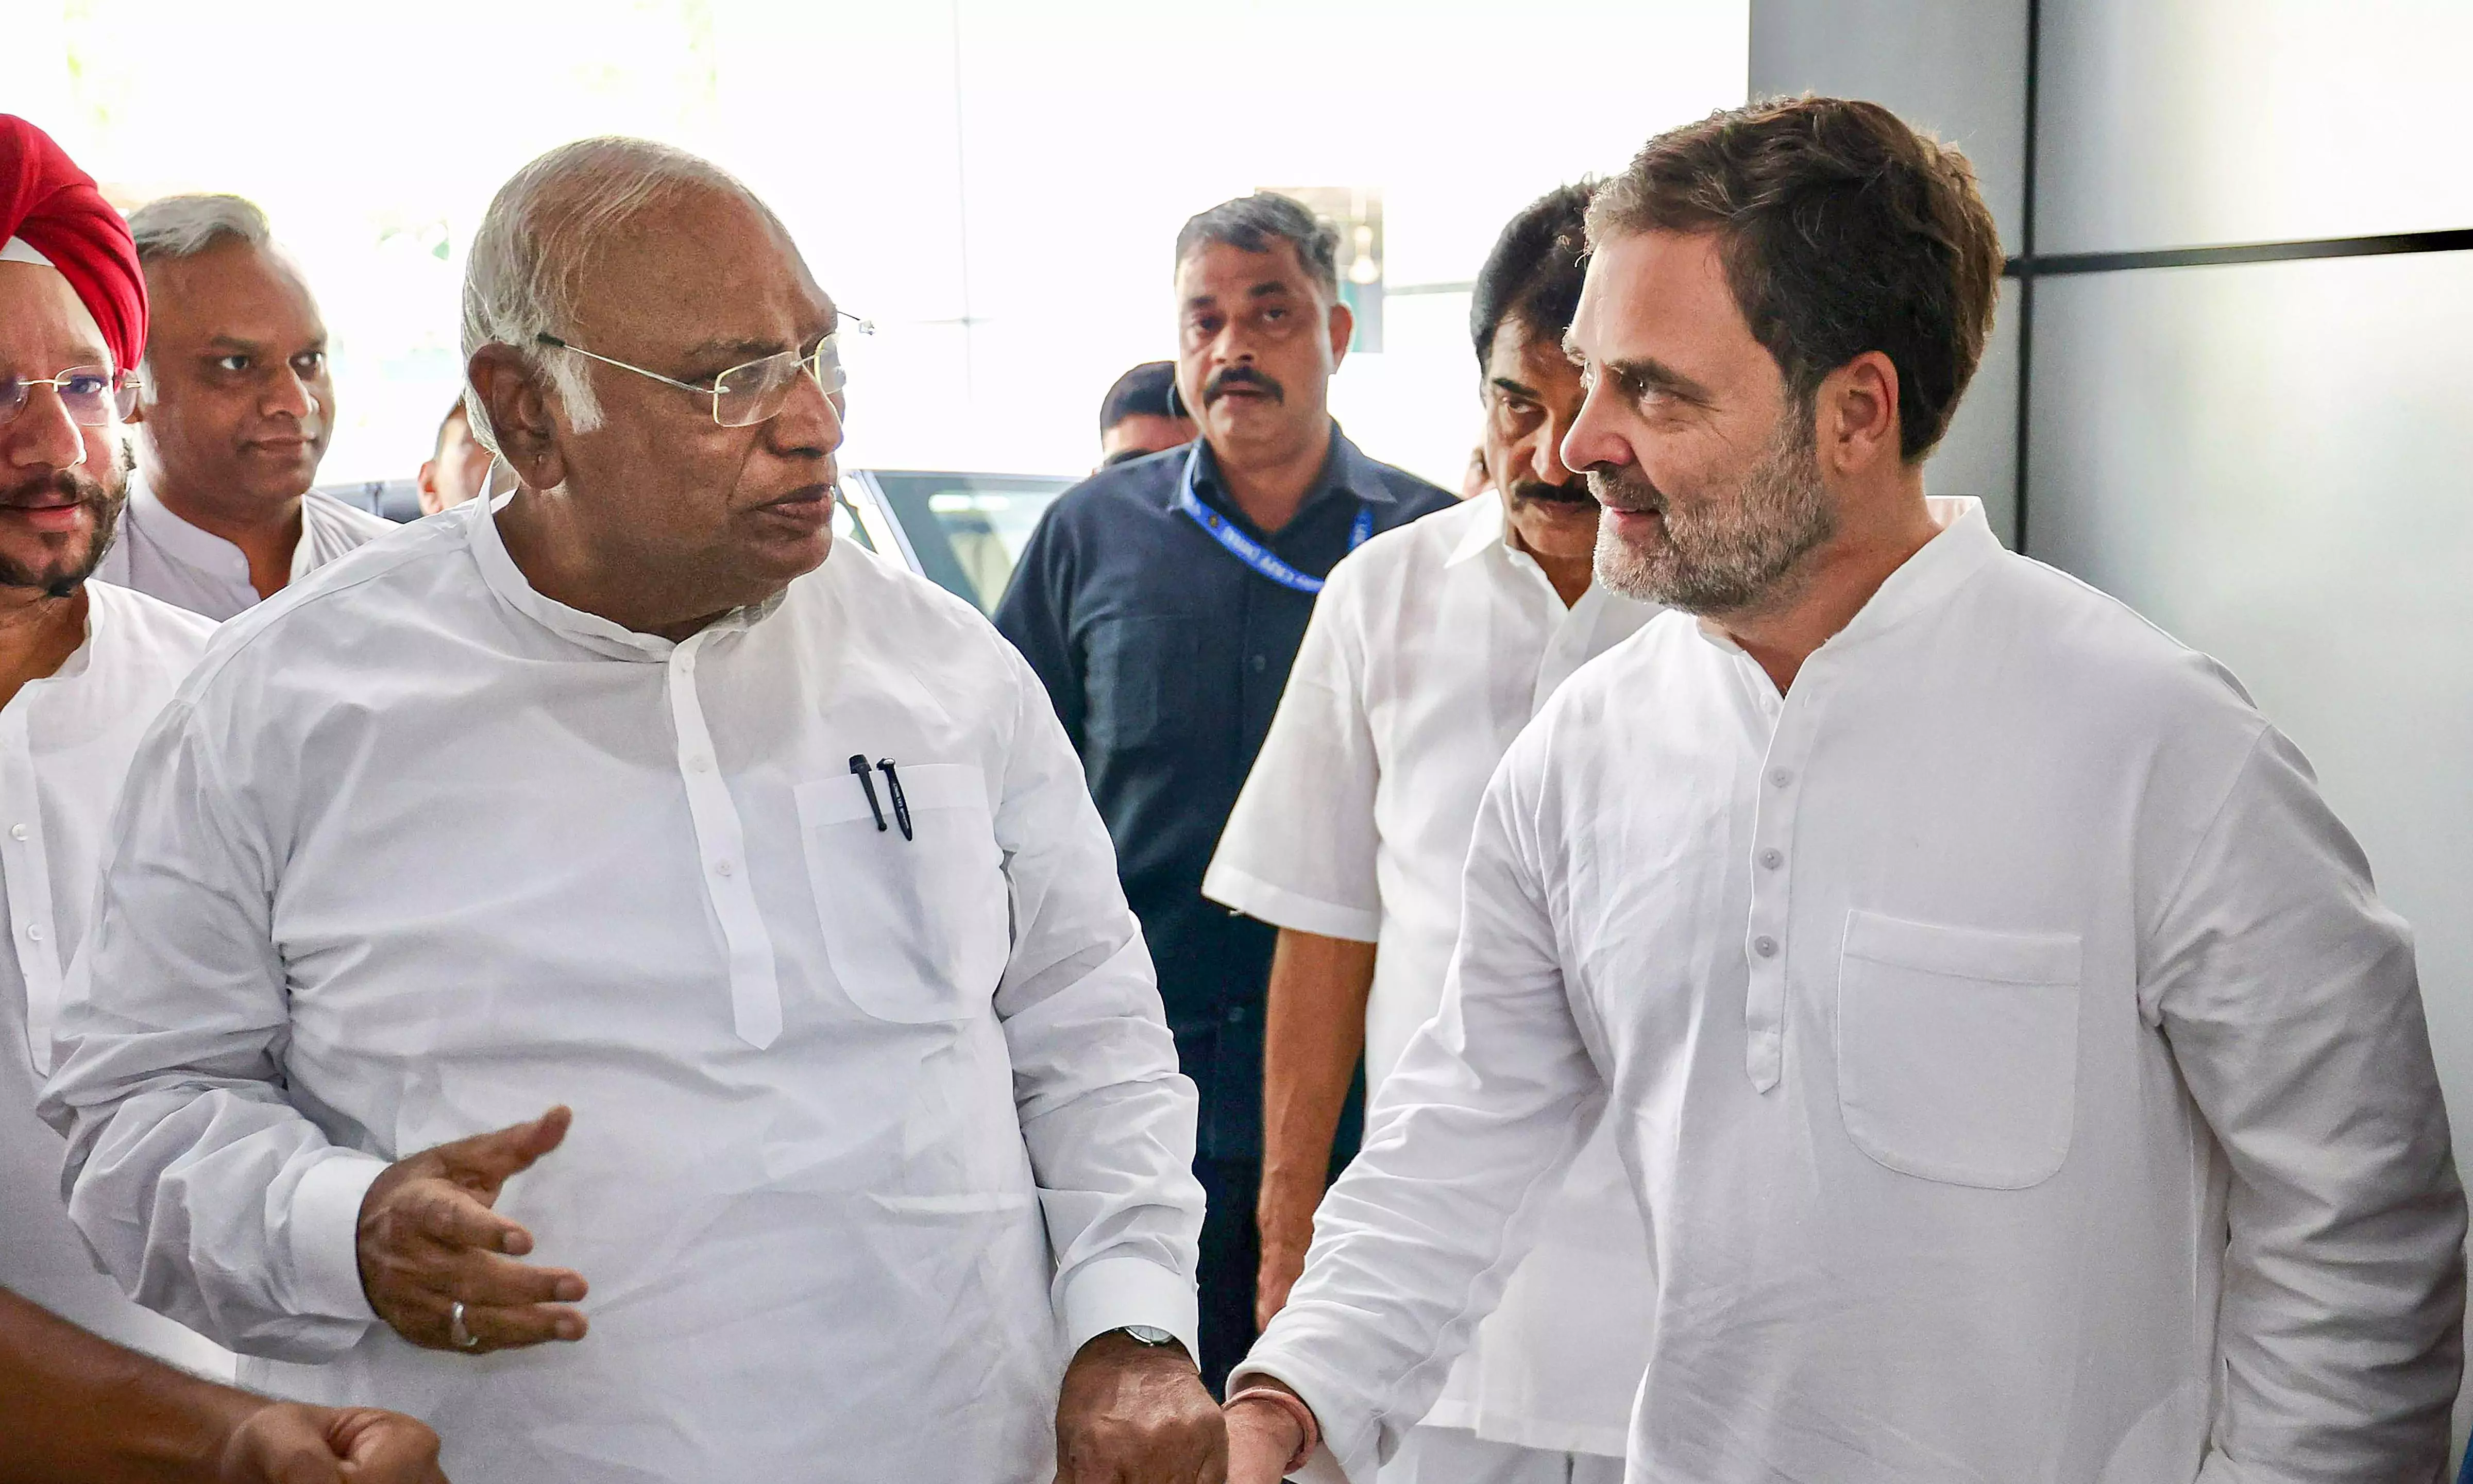 Presidents address: Kharge accuses PM Modi of being perpetually in denial